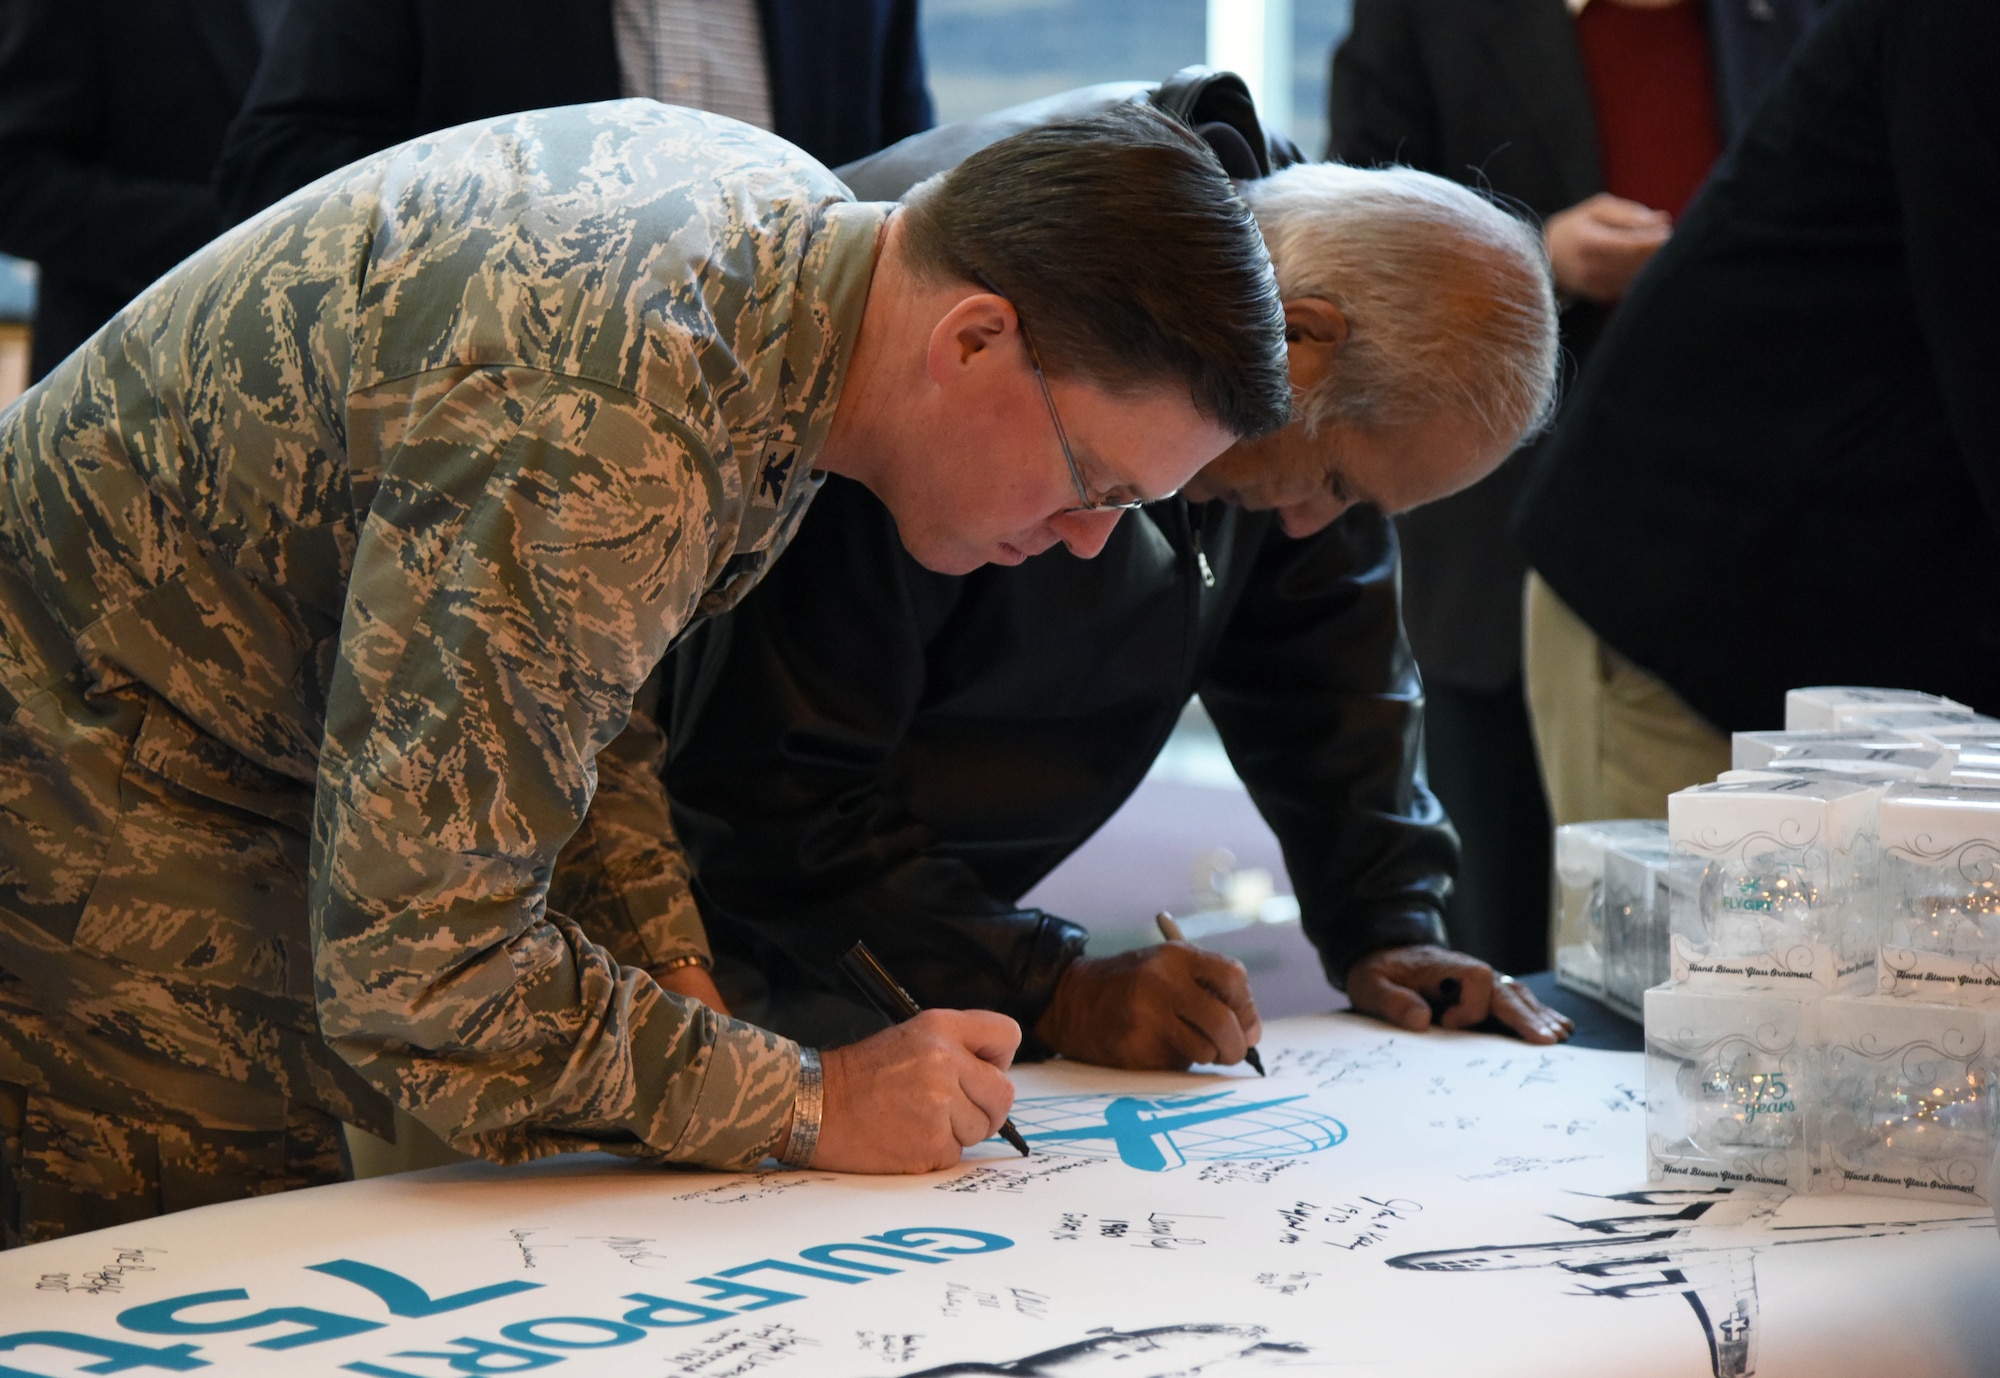 Col. C. Mike Smith, 81st Training Wing vice commander, signs a banner during the Gulfport-Biloxi International Airport 75 Year Commemoration Dec. 13, in Gulfport, Mississippi. A historical marker at the entrance of the airport was unveiled by local dignitaries during the event honoring the airport’s ties to the military dating back to 1942. The U.S. Air Force Band of the West, Nightwatch, also performed during the event. (U.S. Air Force photo by Kemberly Groue)